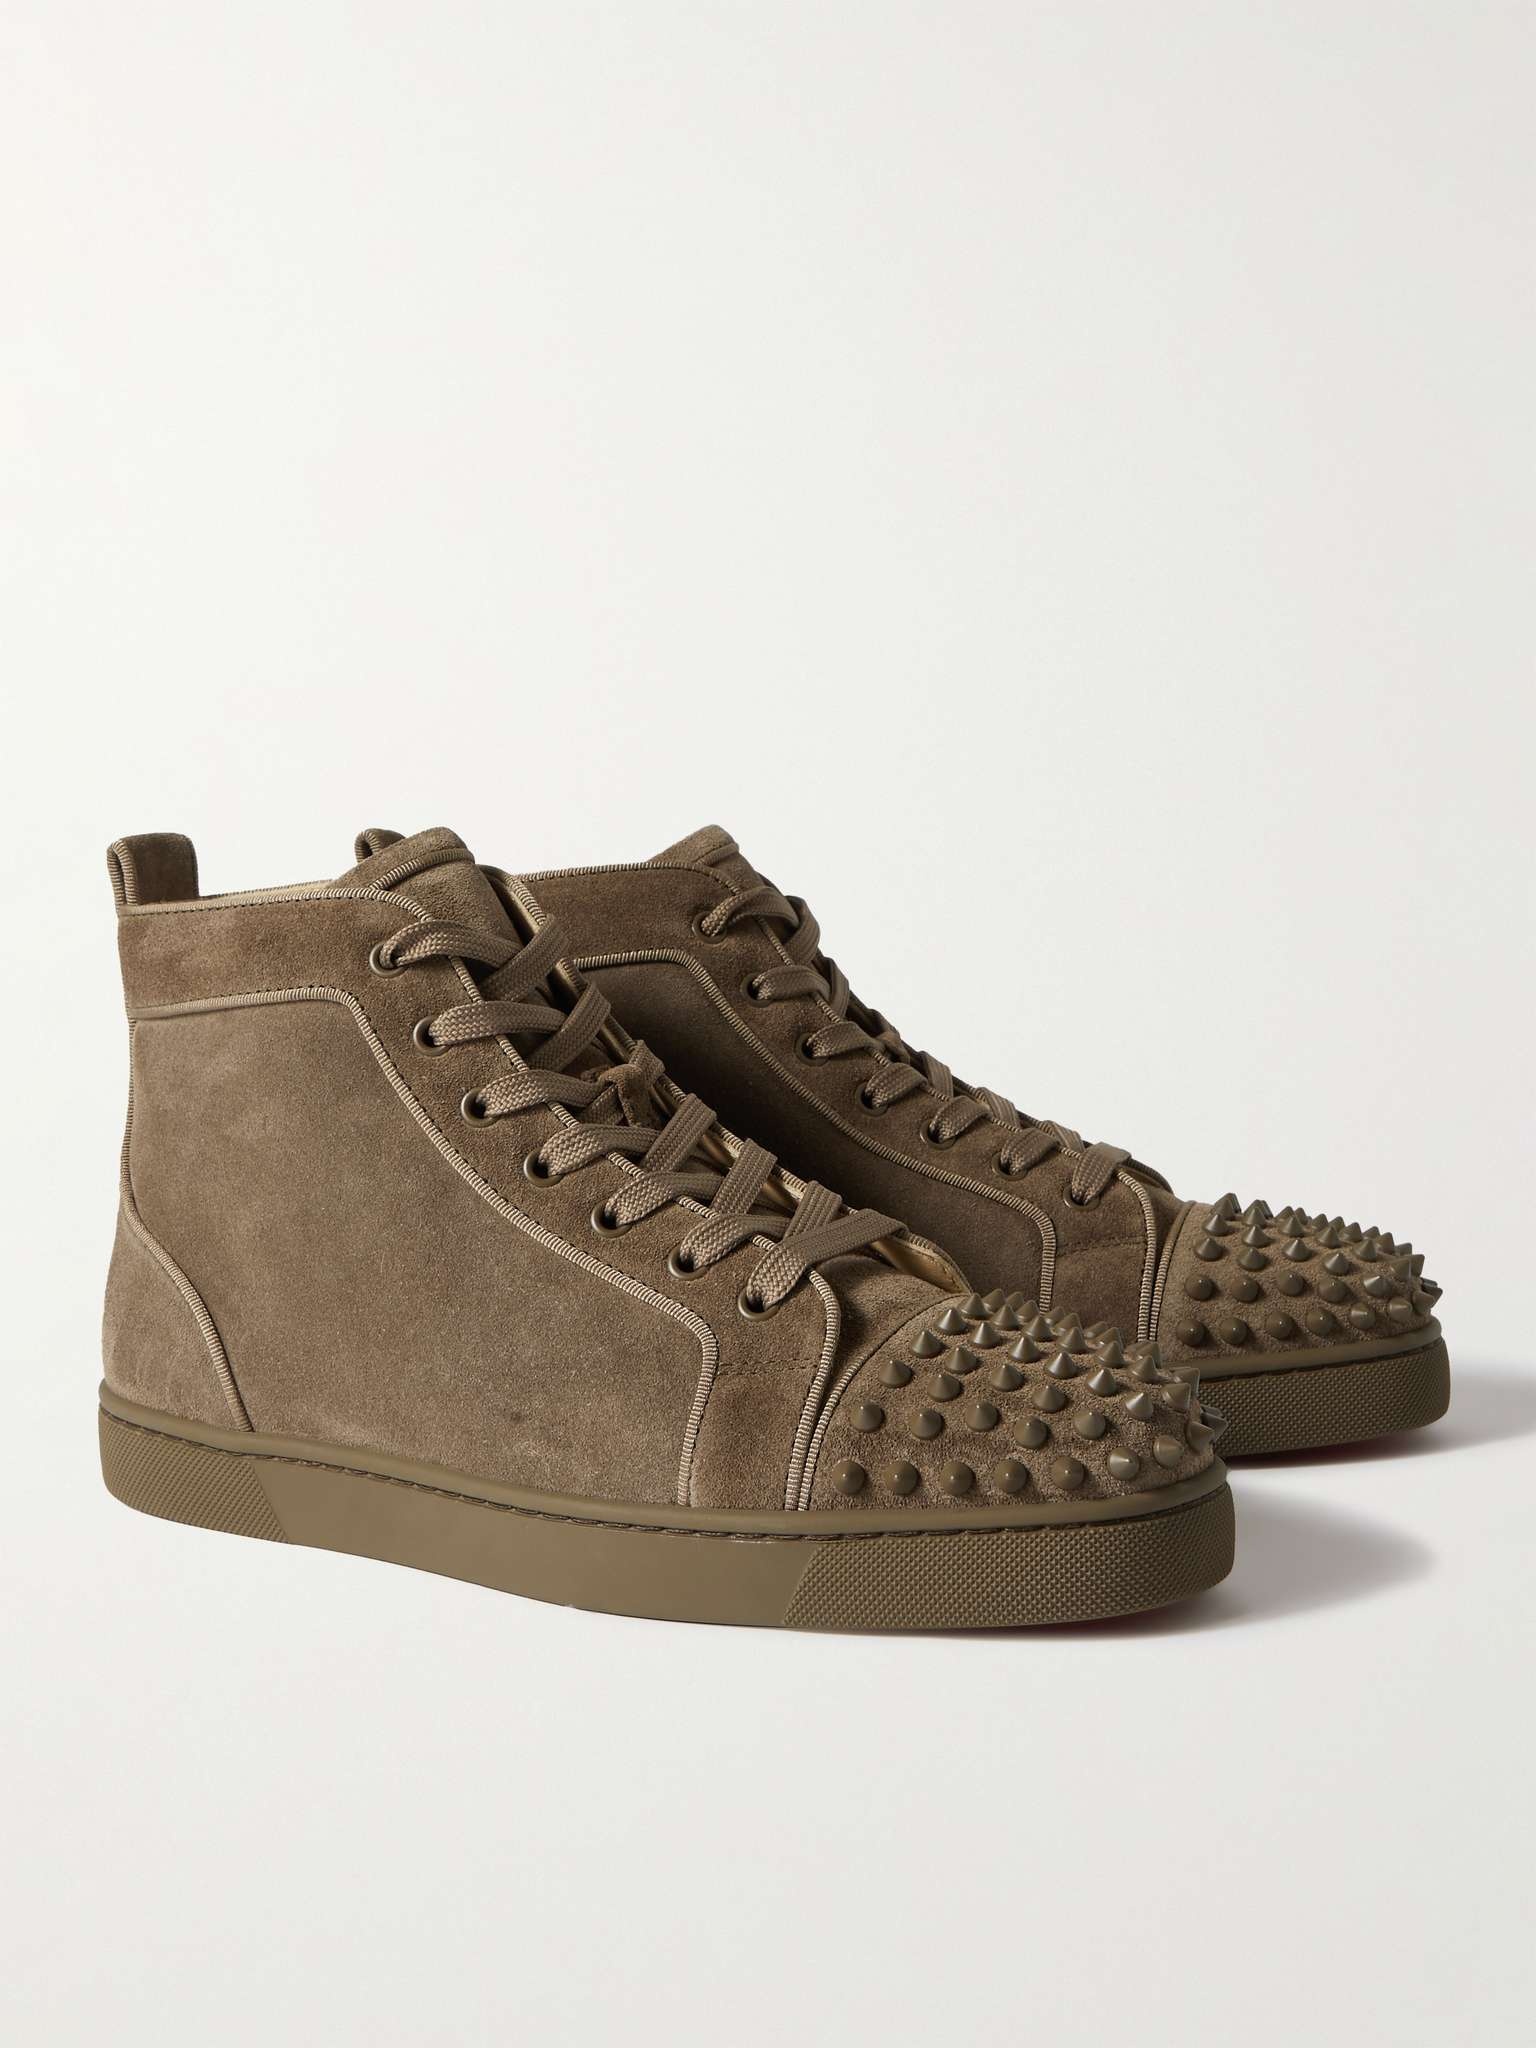 Louis Spiked Suede High-Top Sneakers - 4